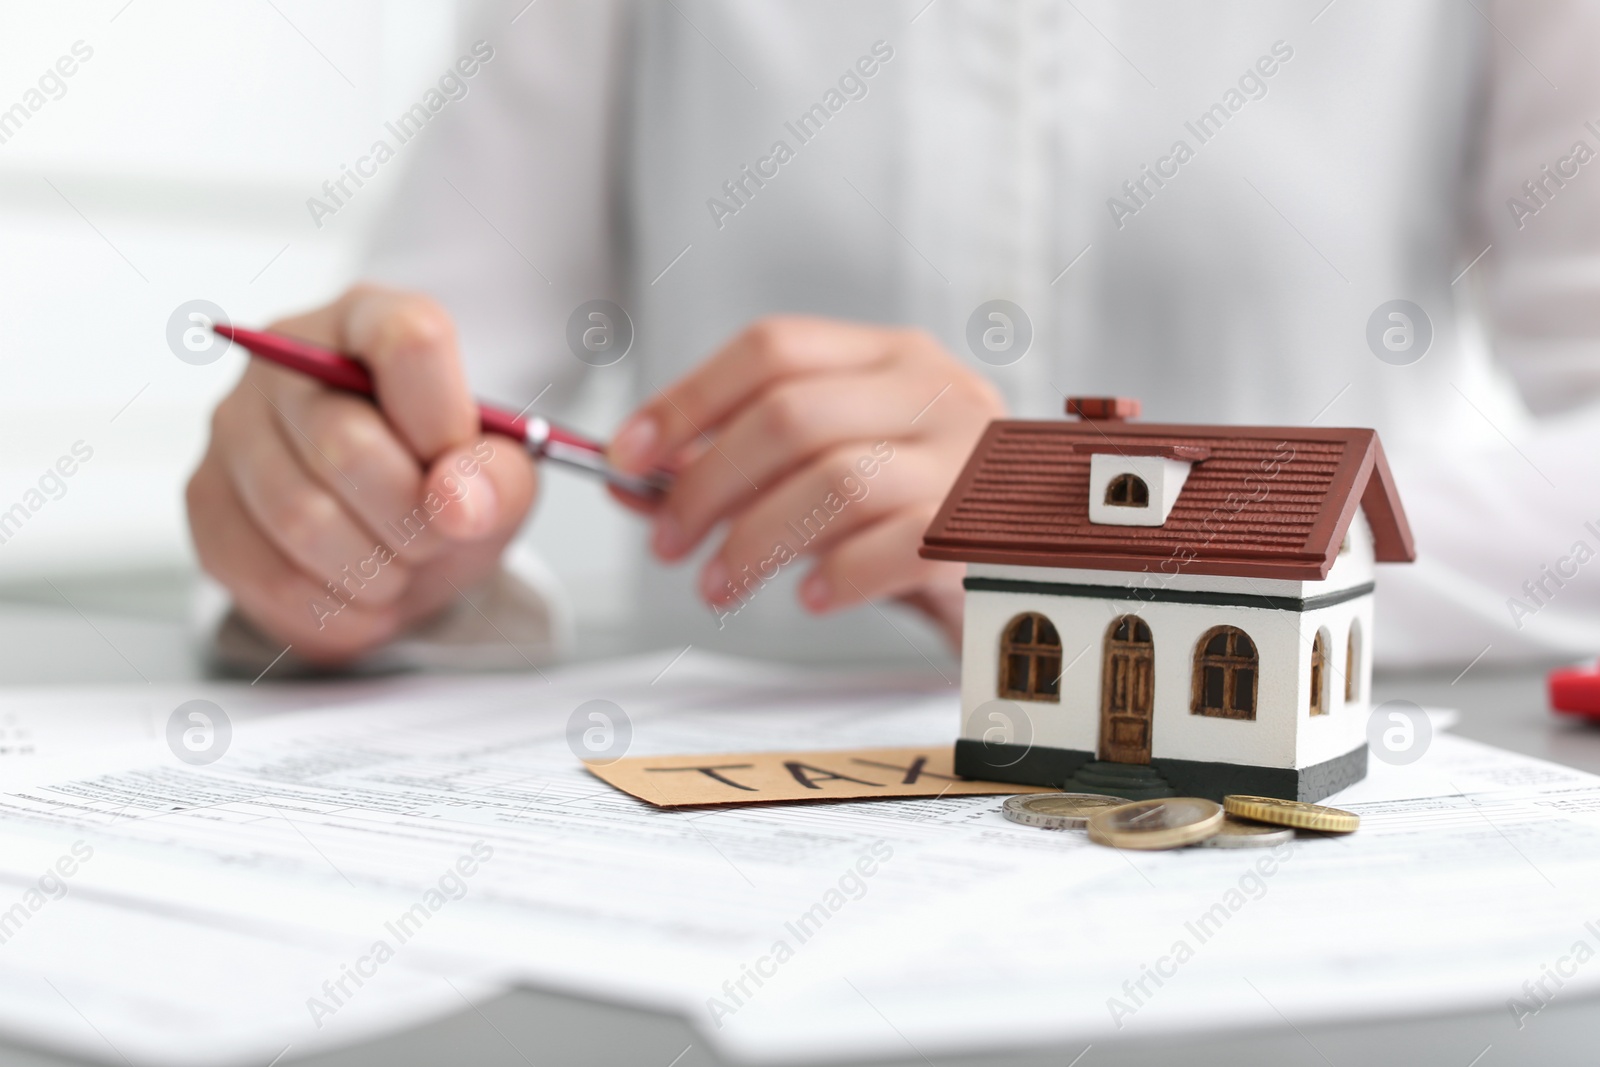 Photo of House model, coins and blurred woman on background. Tax day